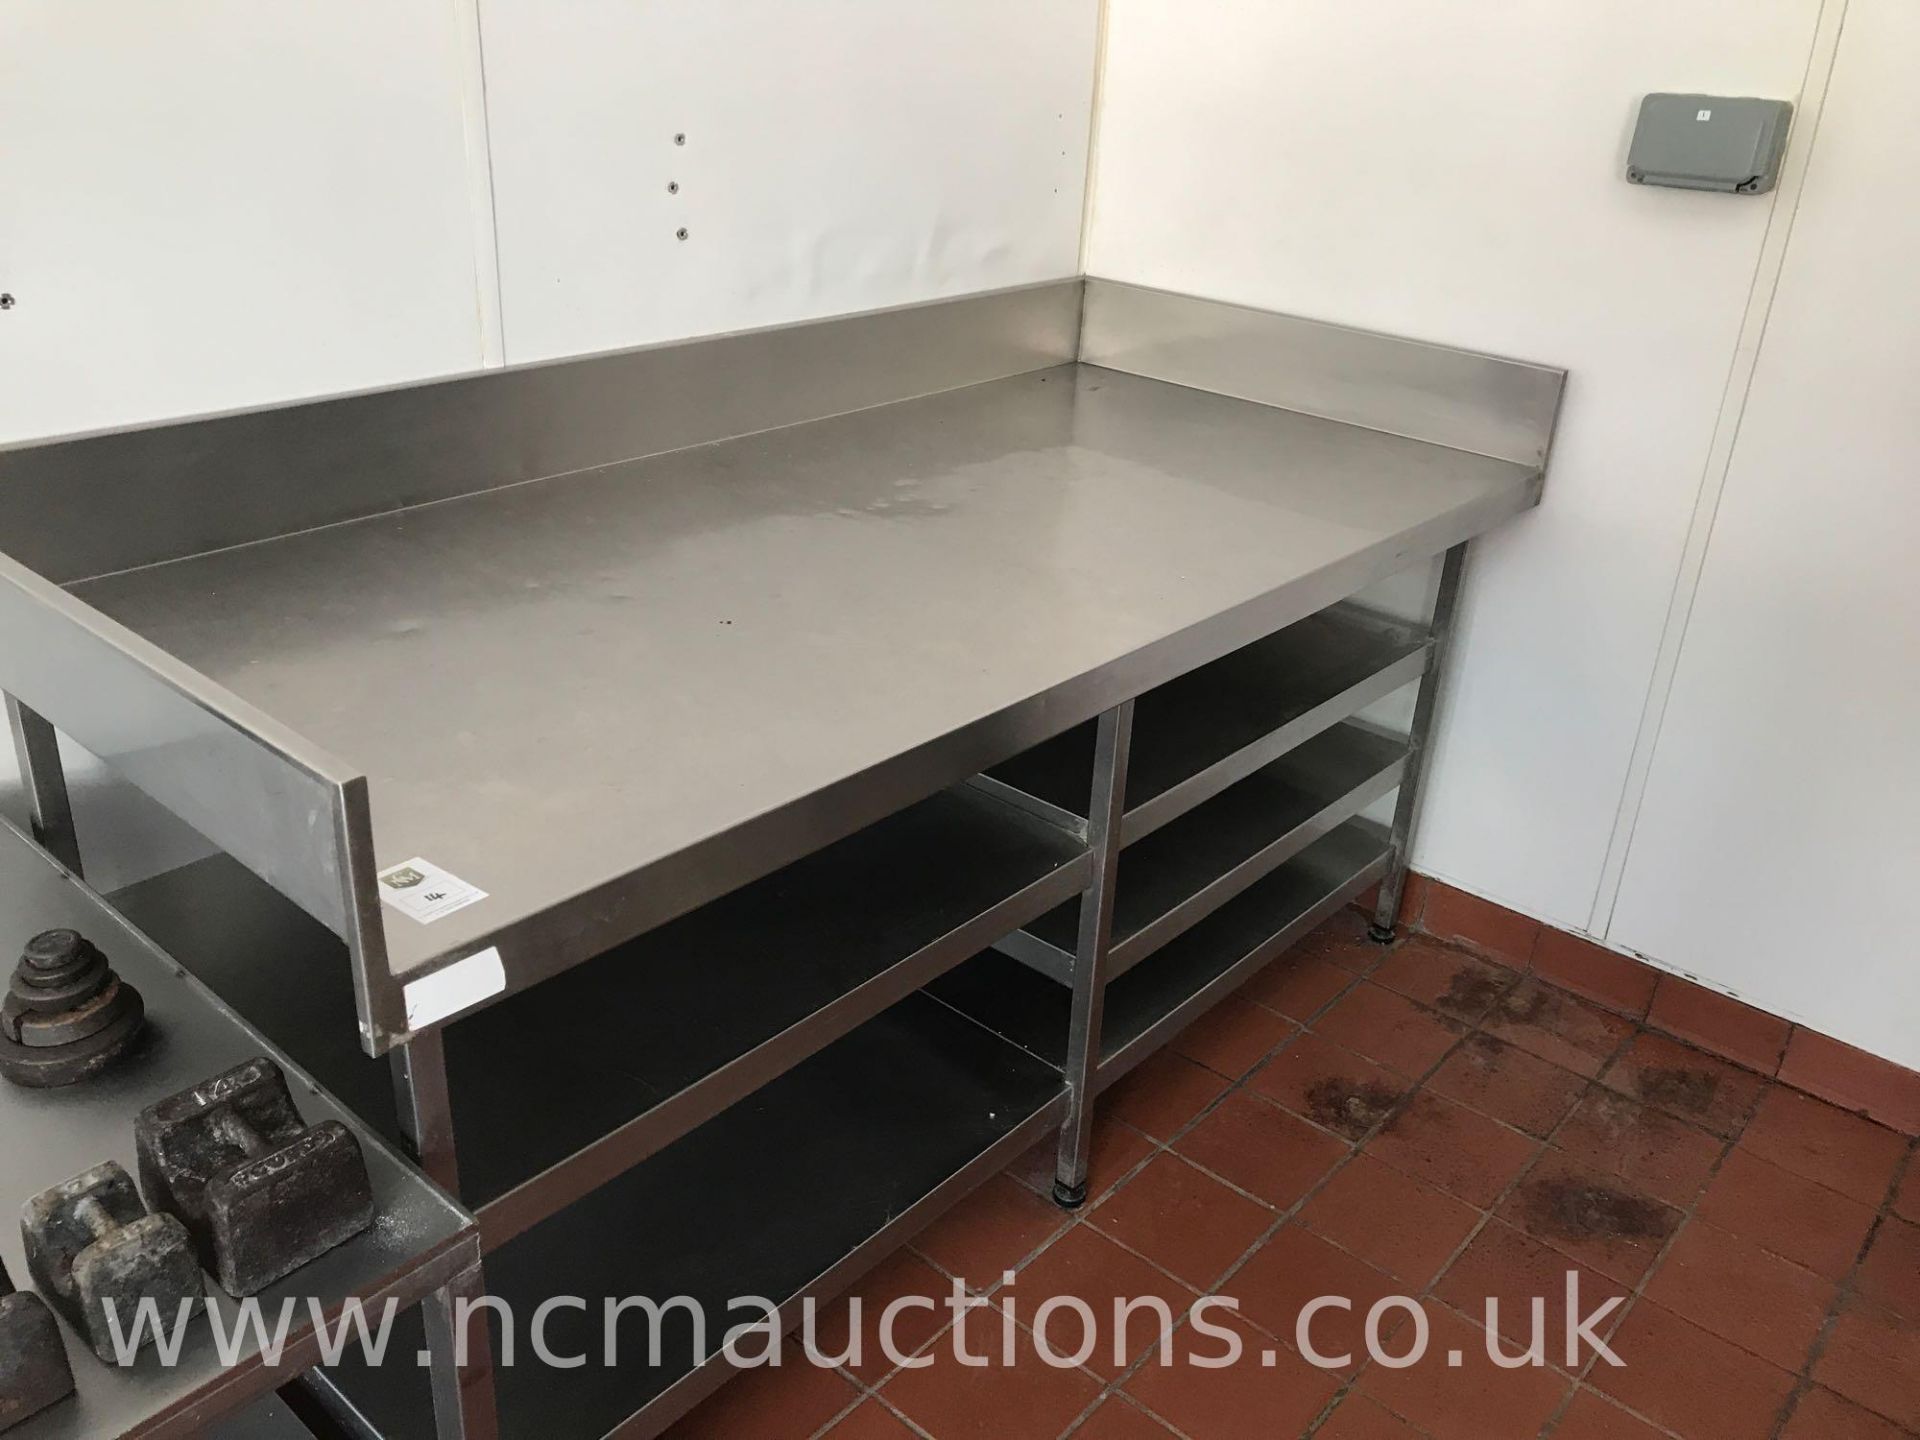 Stainless Steel Preperation Counter with Undercounter Shelves - Image 2 of 3